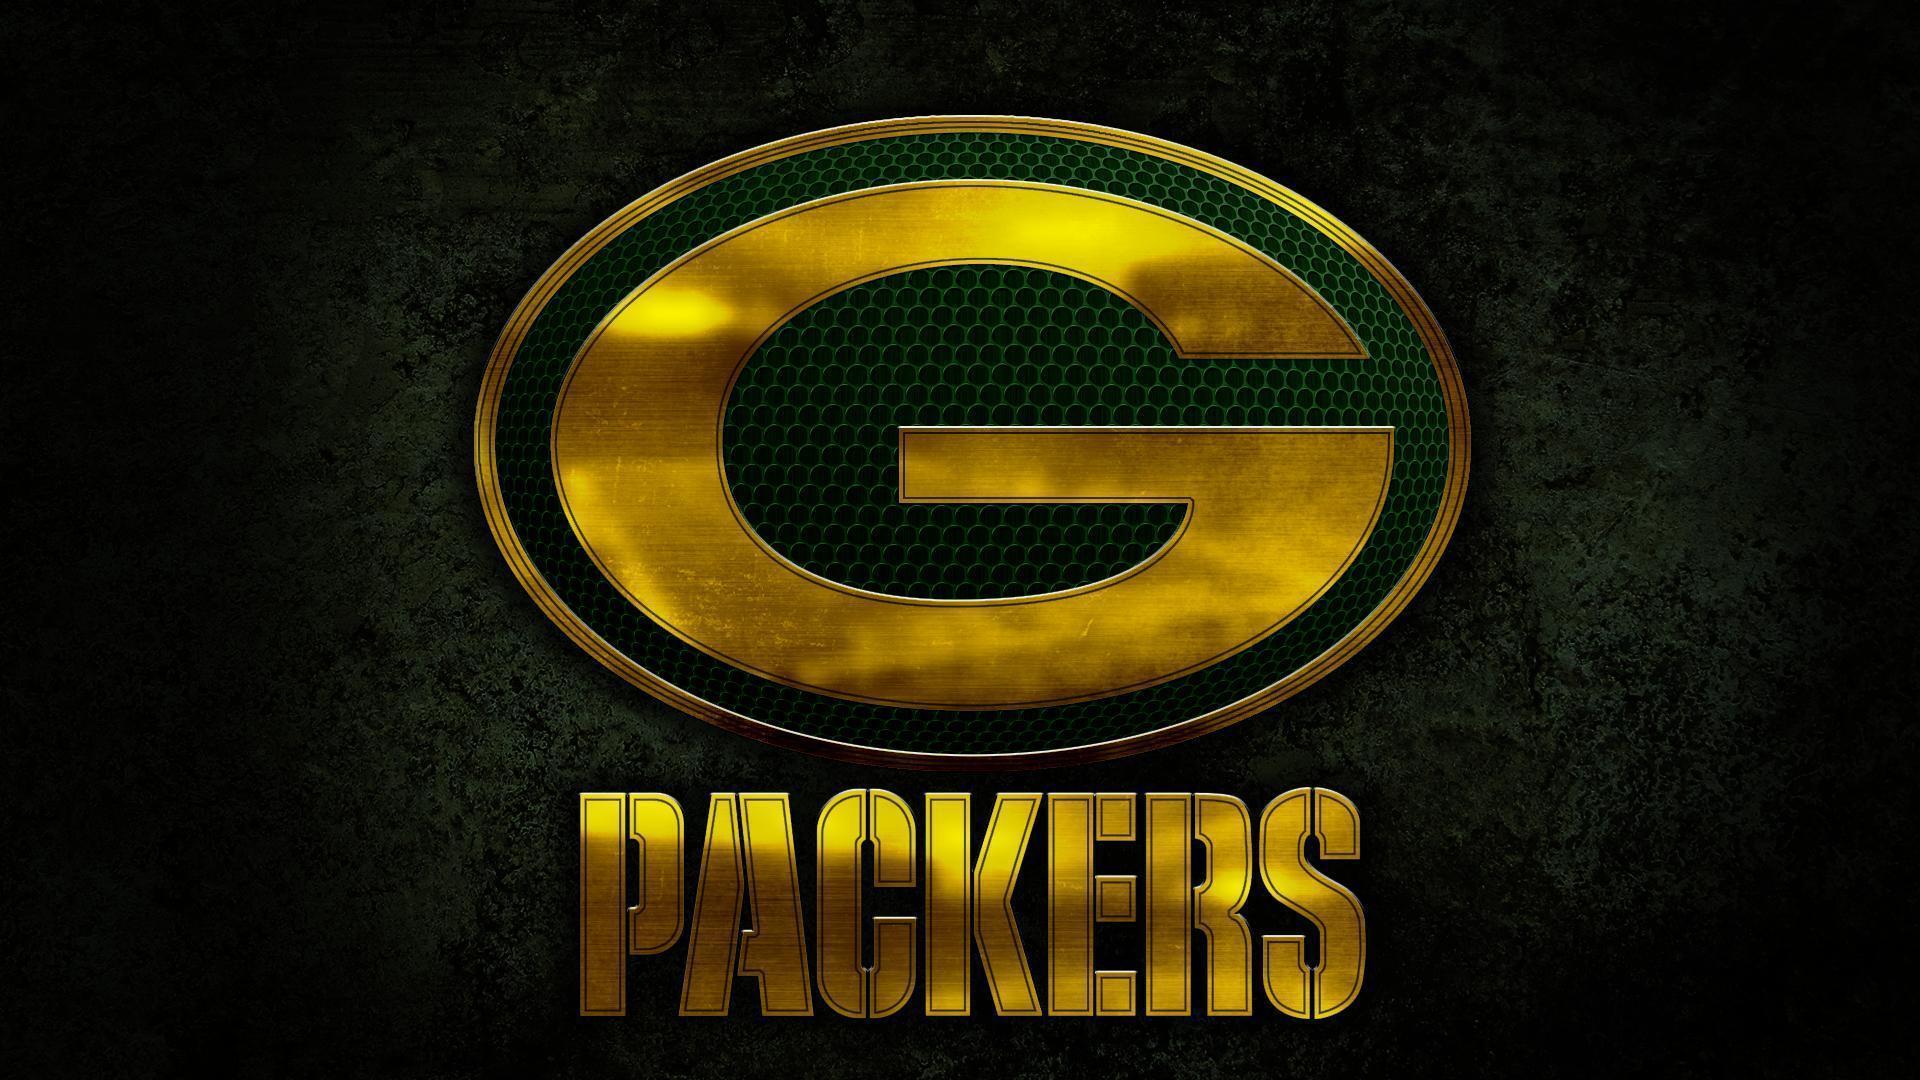 Green Bay Packers Green and Gold themed Digital Backgrounds